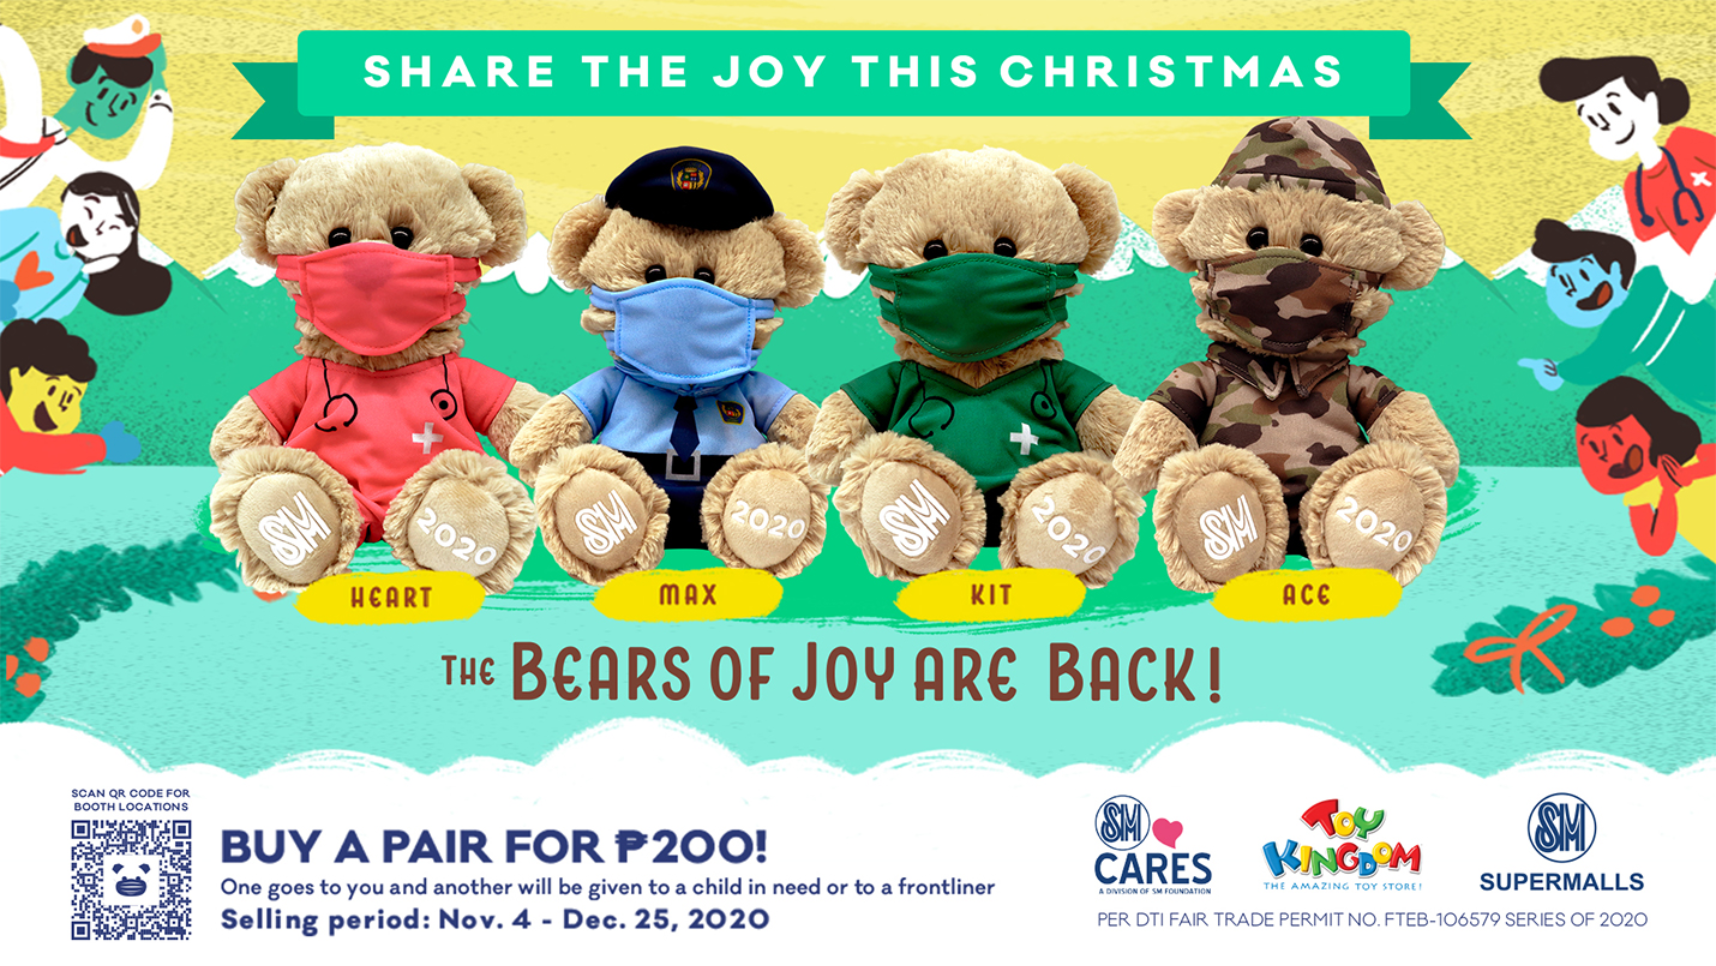 SM Cares rolls out special 'Bears of Joy' plushies in honor of frontliners